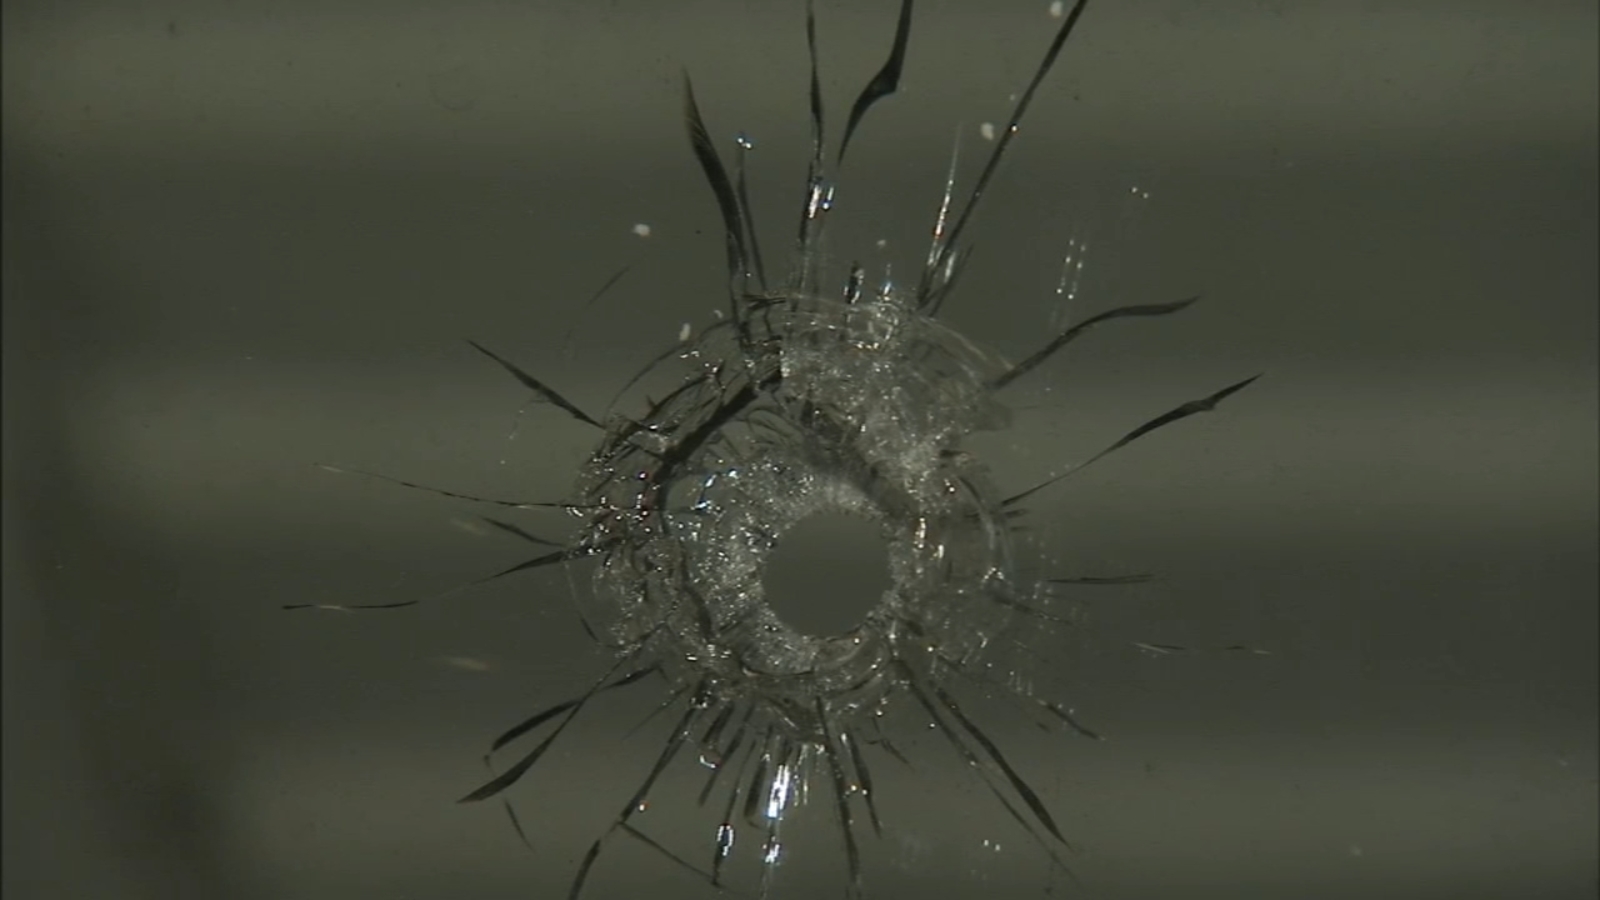  Eddystone family wants answers after stray bullet hits home, narrowly misses child 